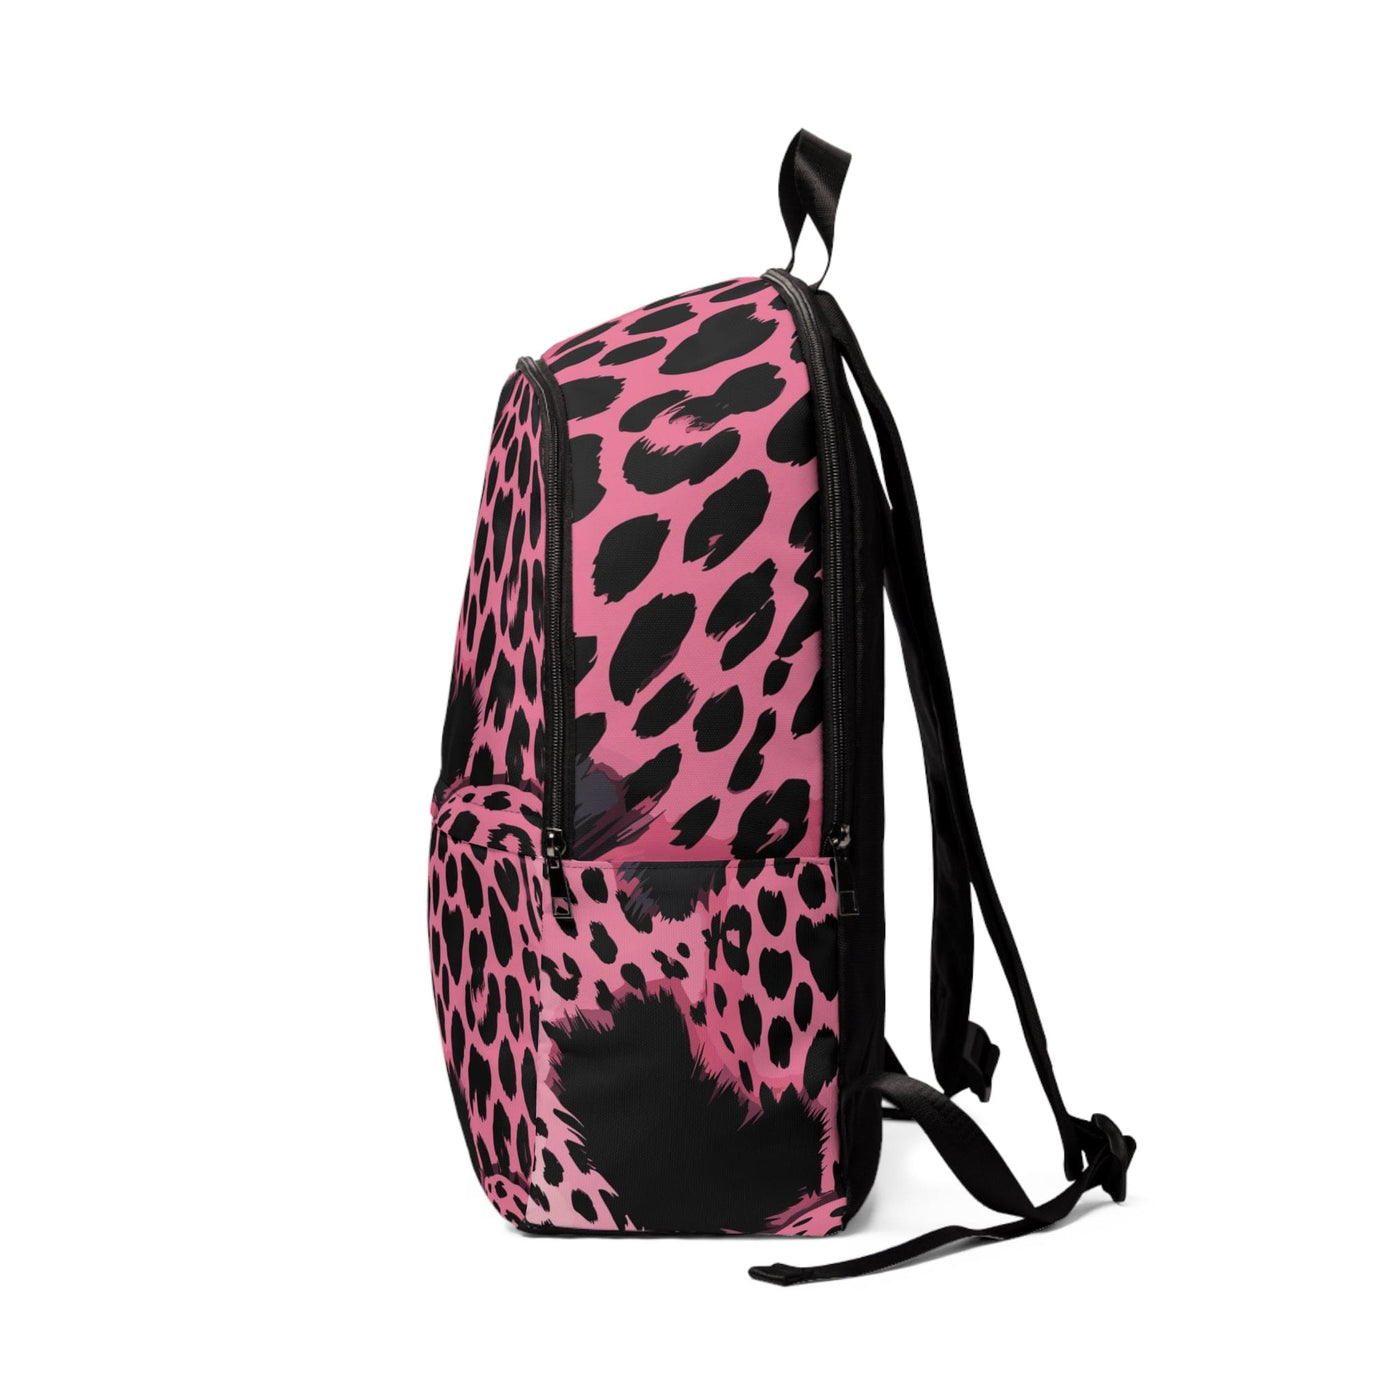 Fashion Backpack Waterproof Pink And Black Spotted Illustration - Bags